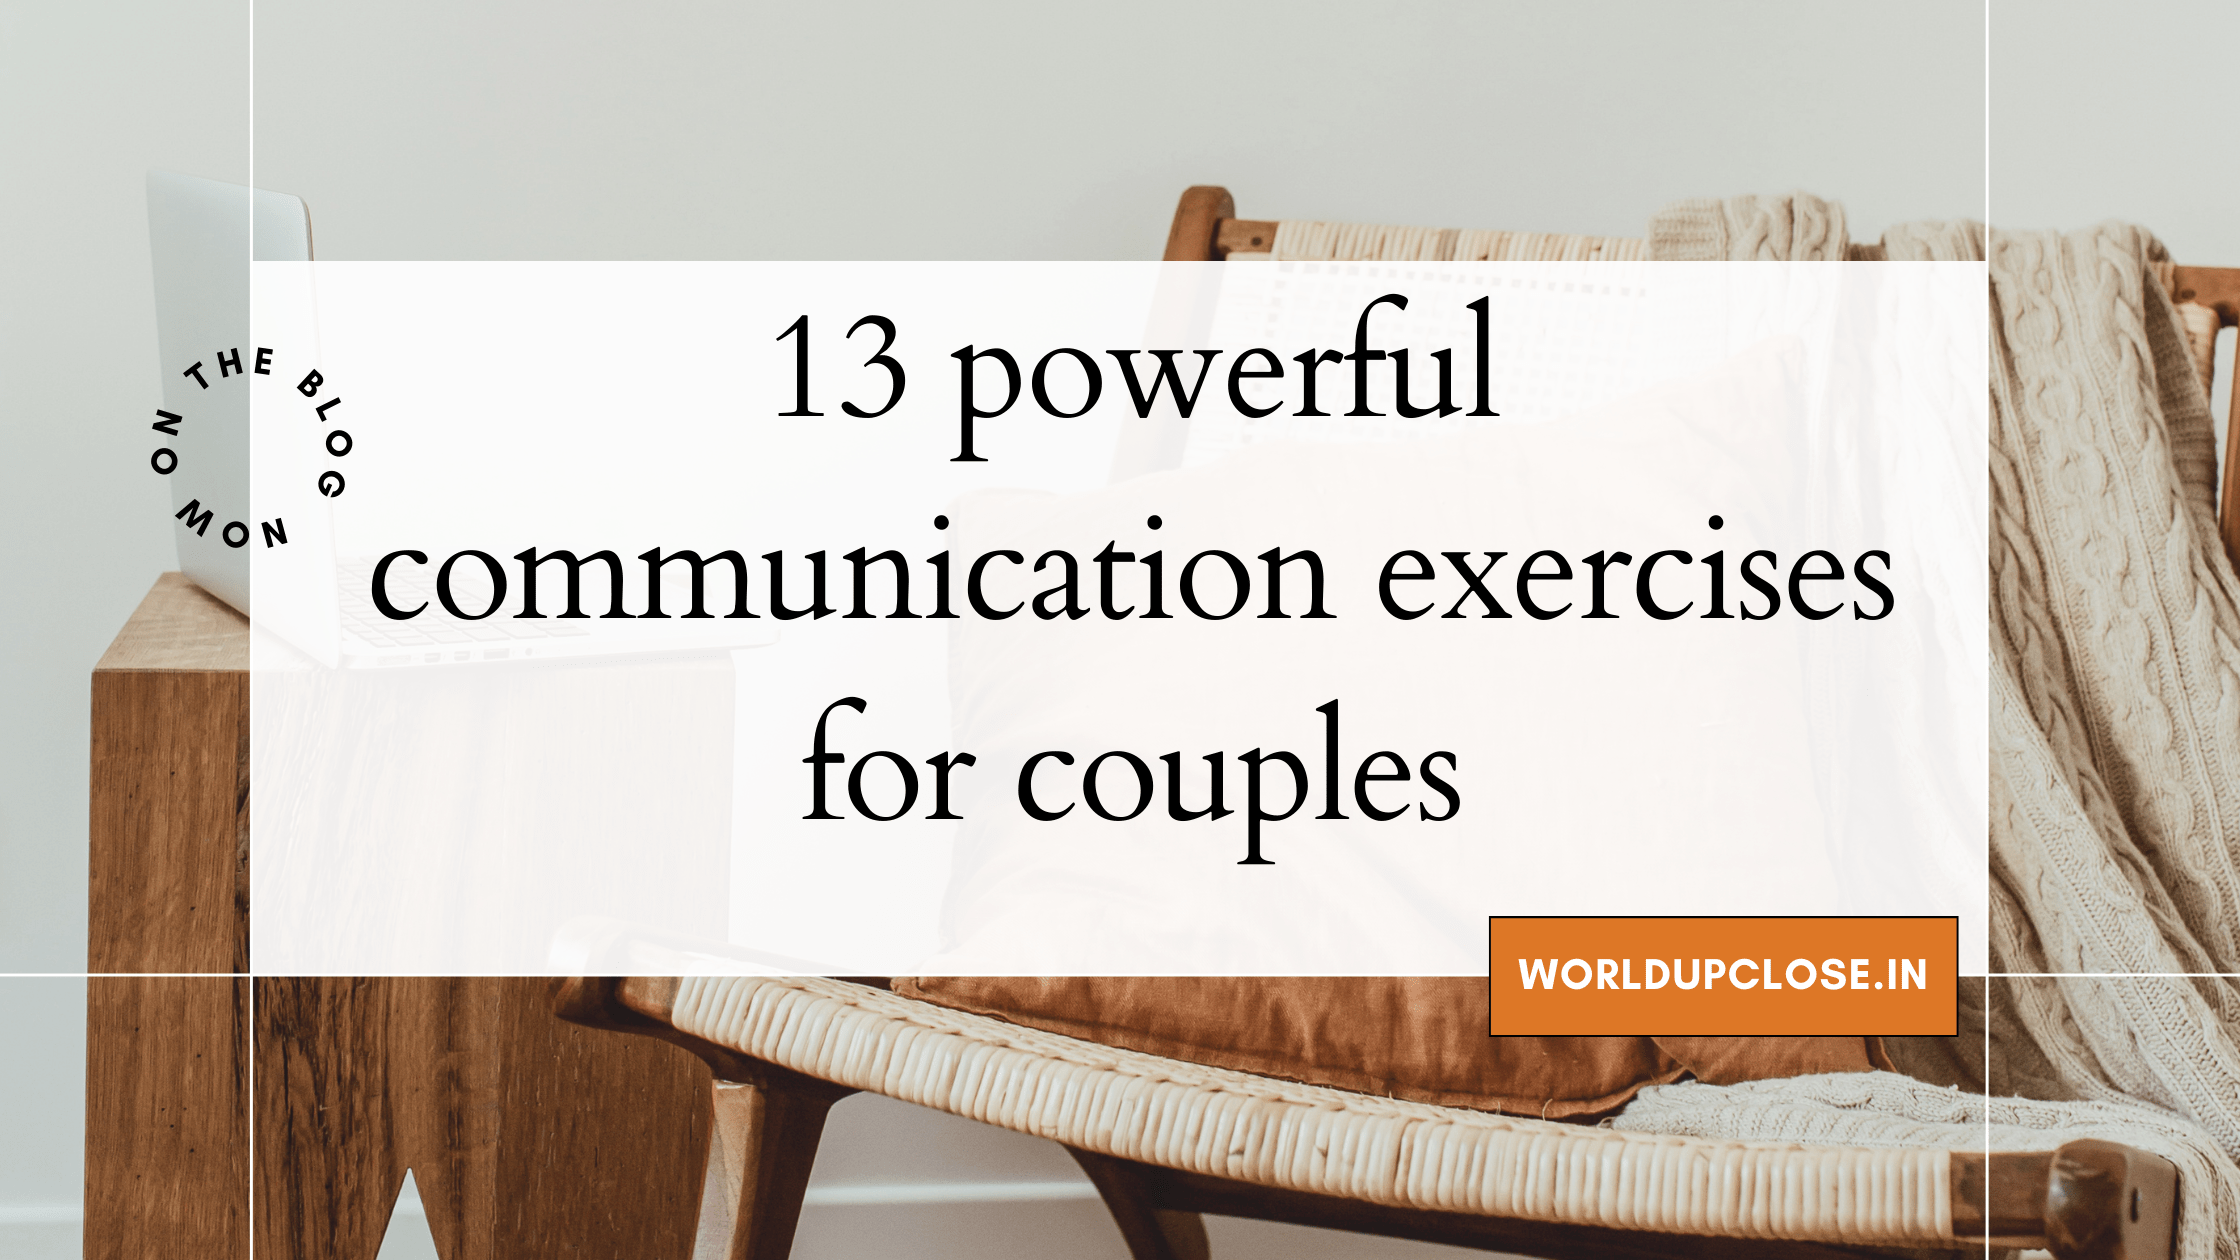 13 powerful communication exercises for couples 54